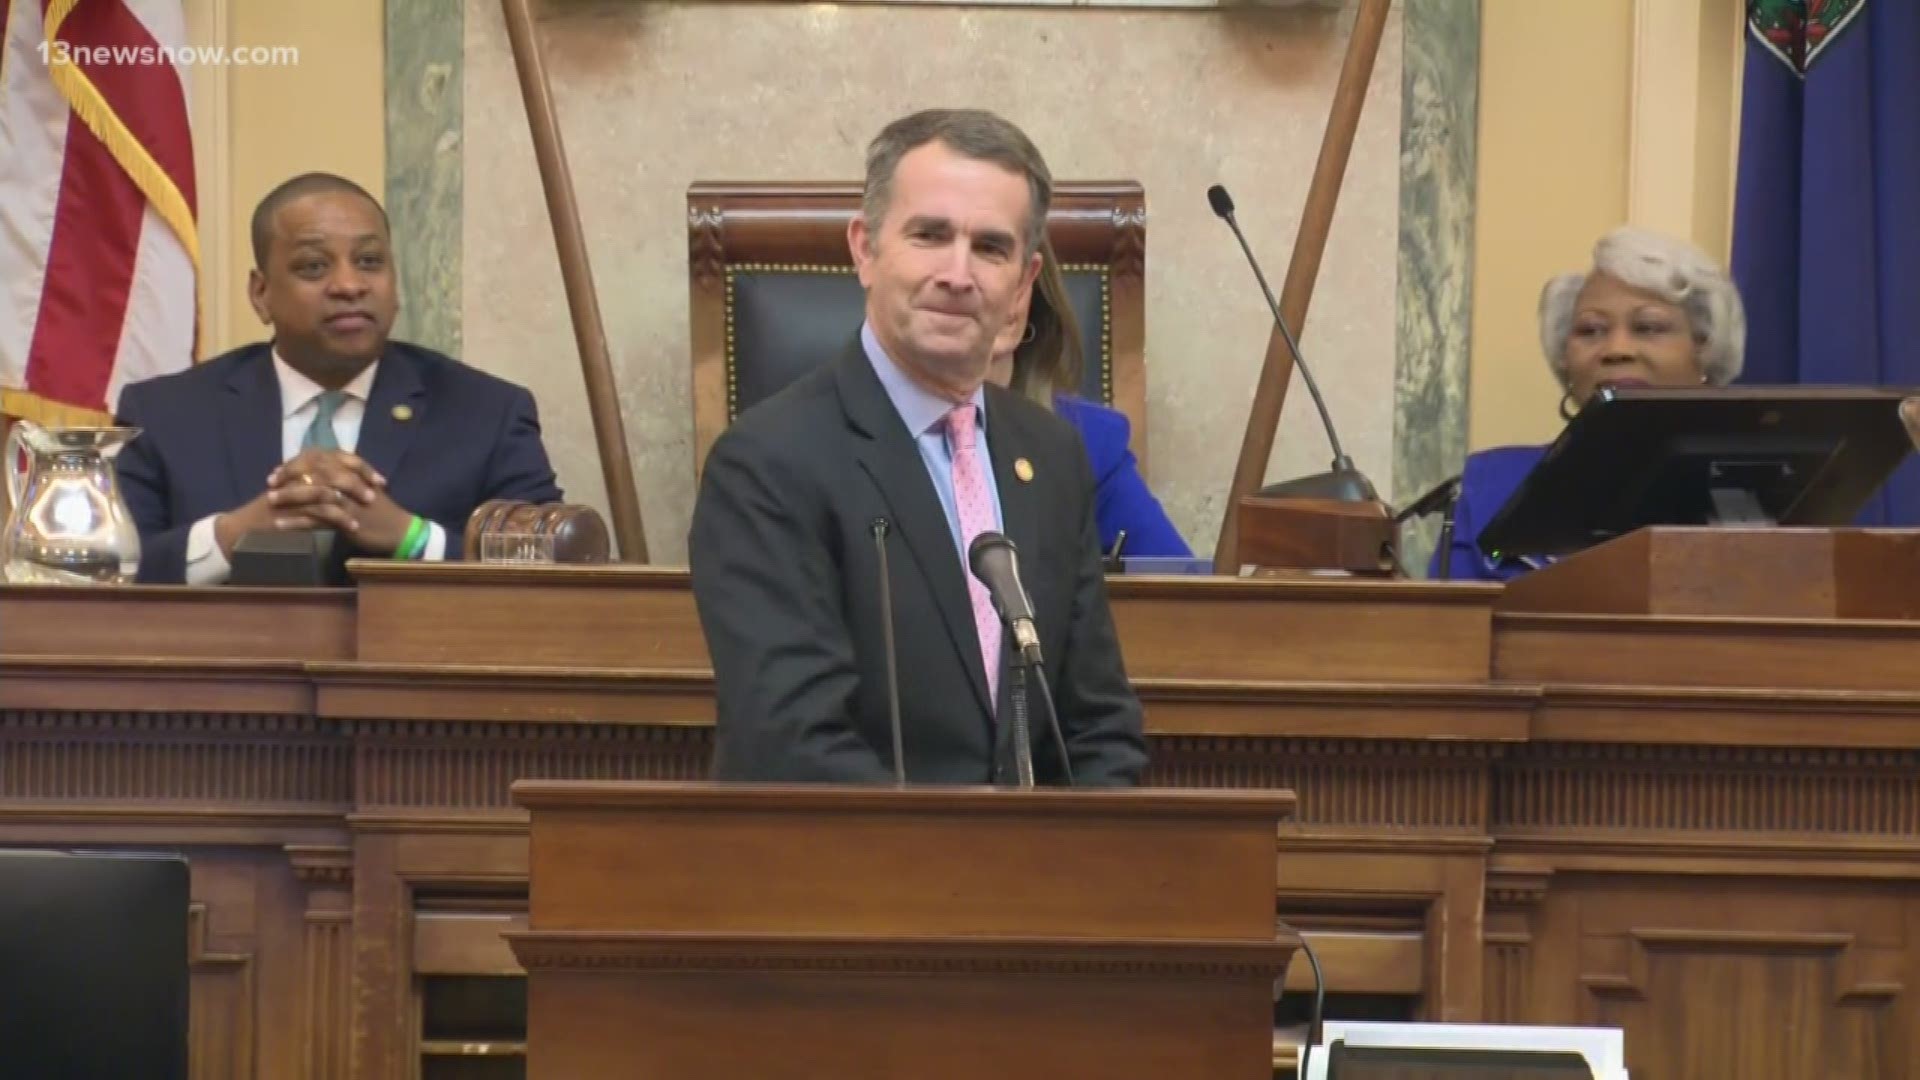 13News Now Nicole Livas dives in and breaks down some of the major parts of Governor Ralph Northam's 2020 State of the Commonwealth address.